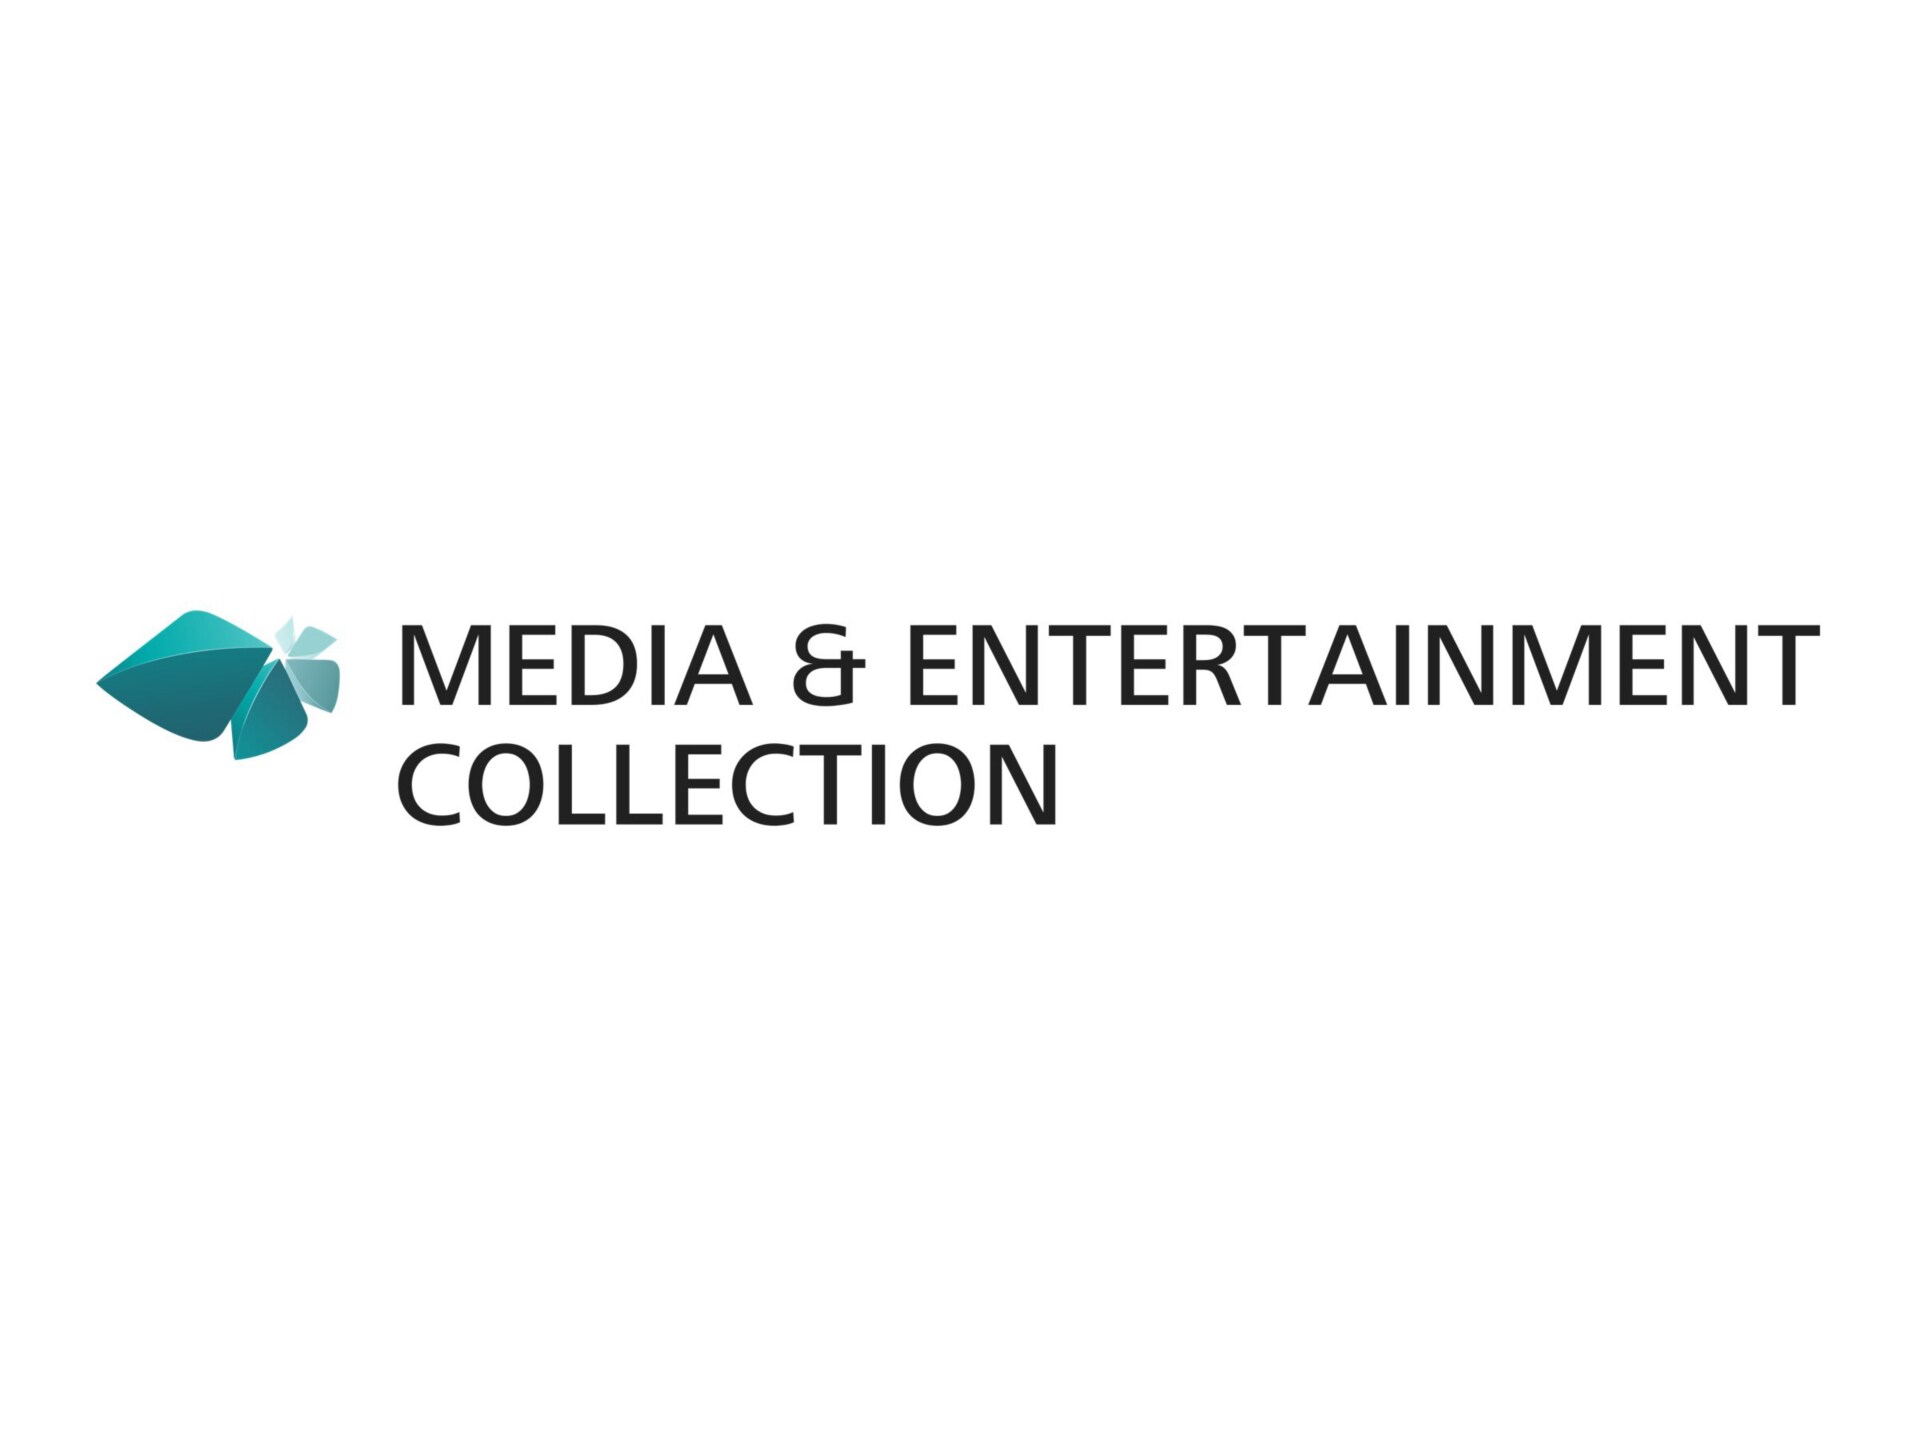 Autodesk Media & Entertainment Collection - Subscription Renewal (1 month)